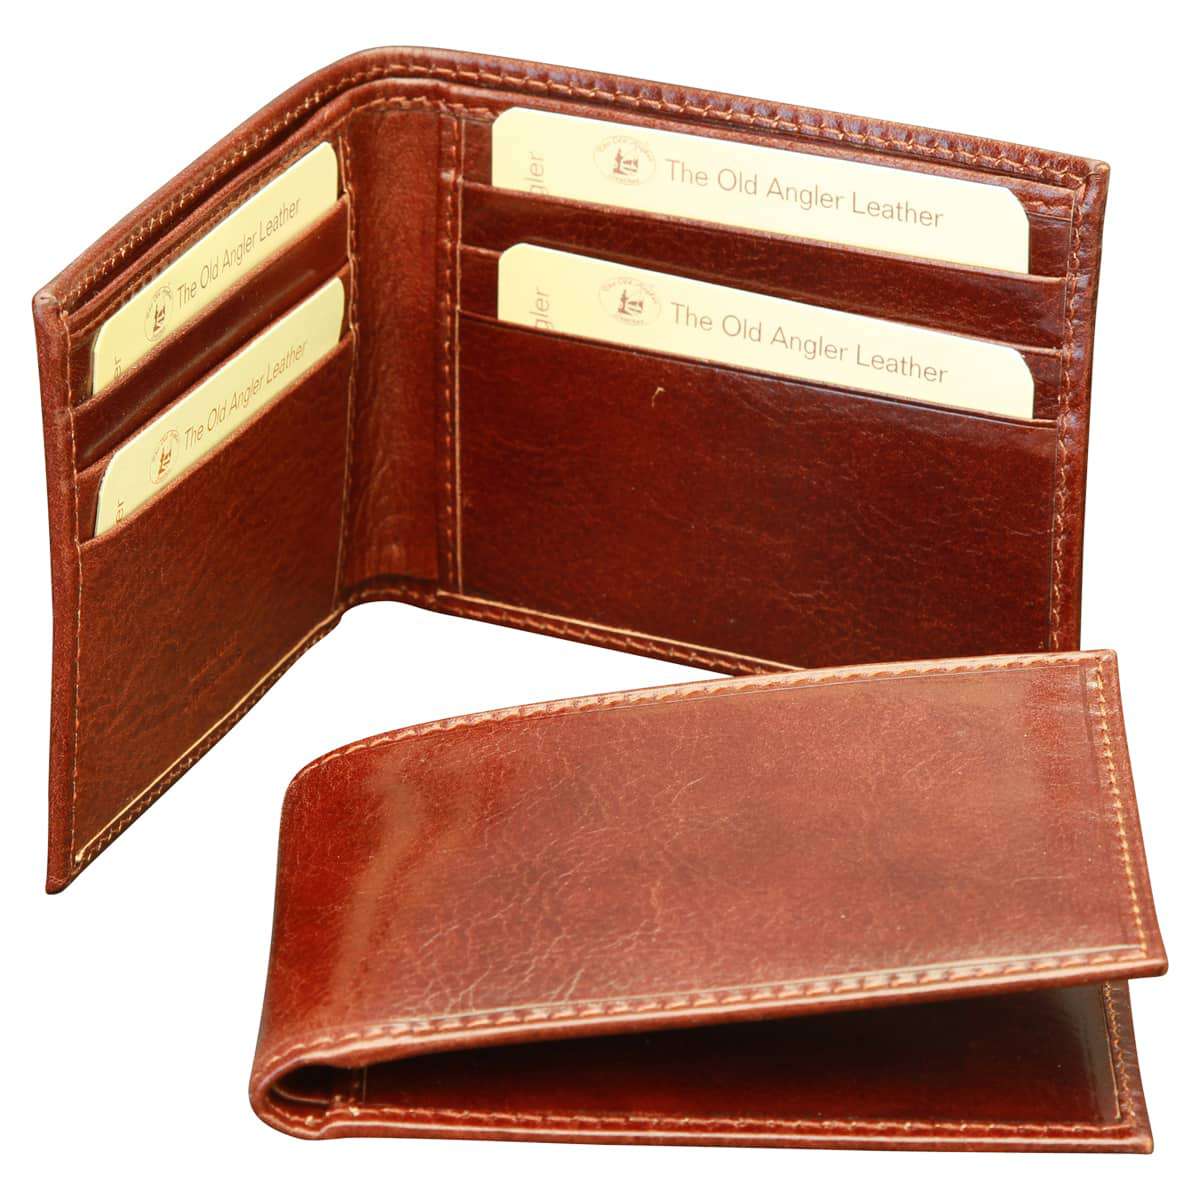 Bifold wallet with RFID blocking technology - Brown | 802605MA UK | Old Angler Firenze